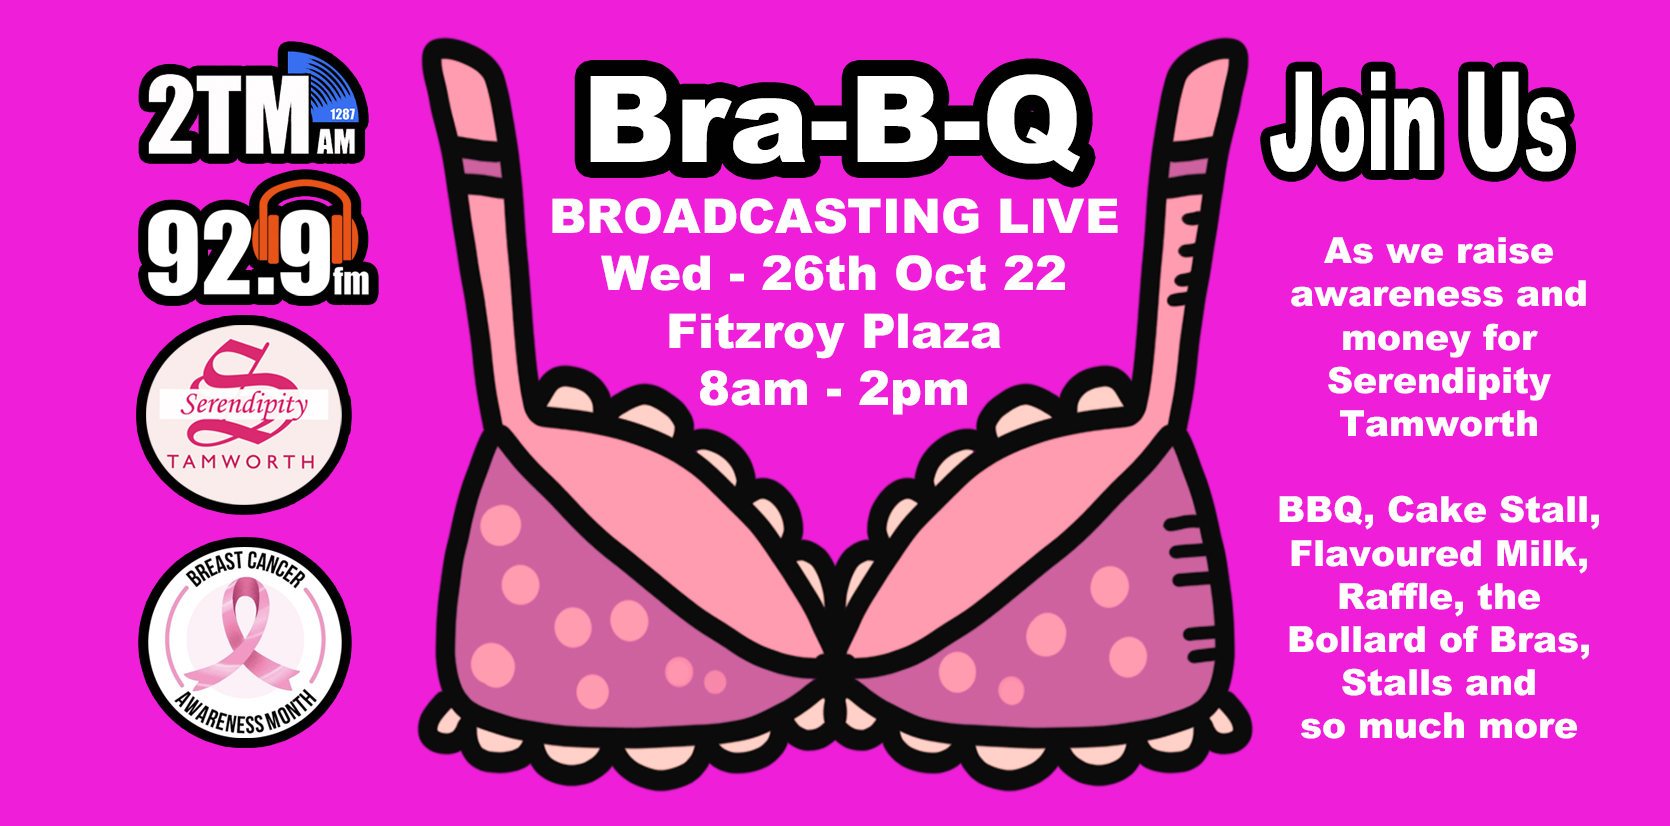 2TM and 92.9fm hold a Bra-B-Q for Breast Cancer Awareness